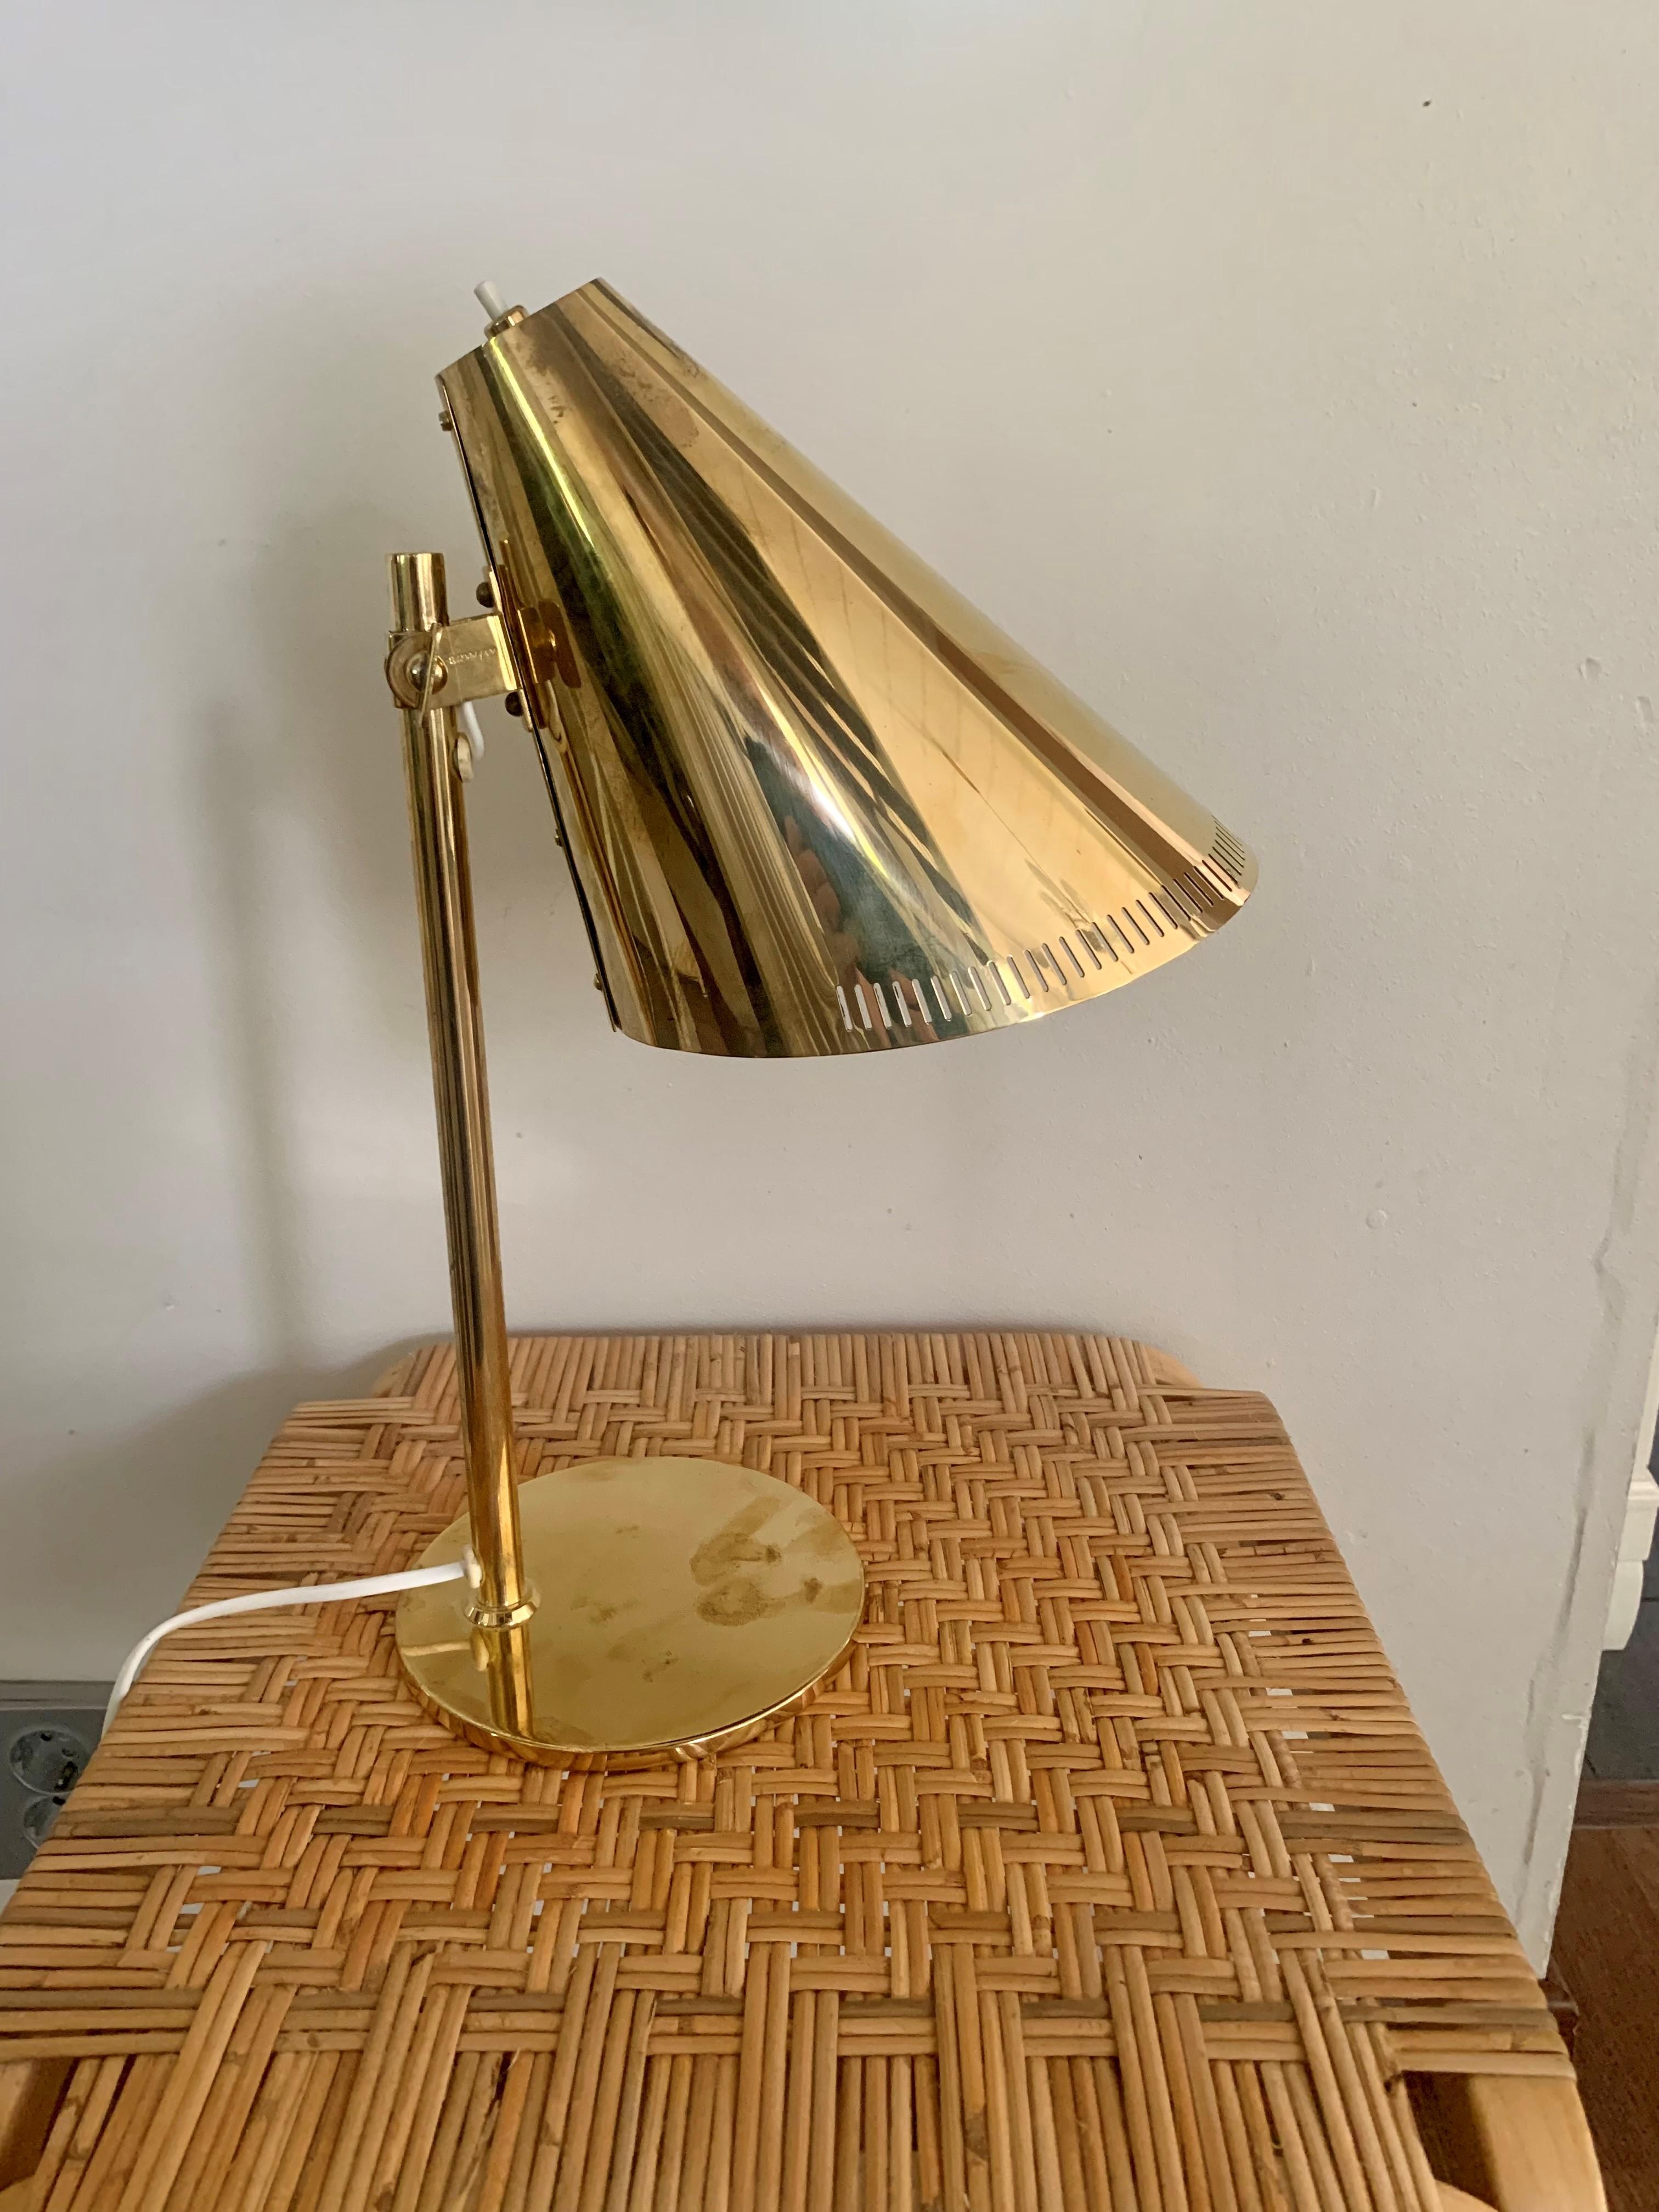 Designed by Paavo Tynell, the 9227 table lamp emits warm, vivid light around it. The lamp is defined by its beautifully slender shade with brass and glass, that is positioned on a sturdy stand. The table lamp is perfect for creating a lovely